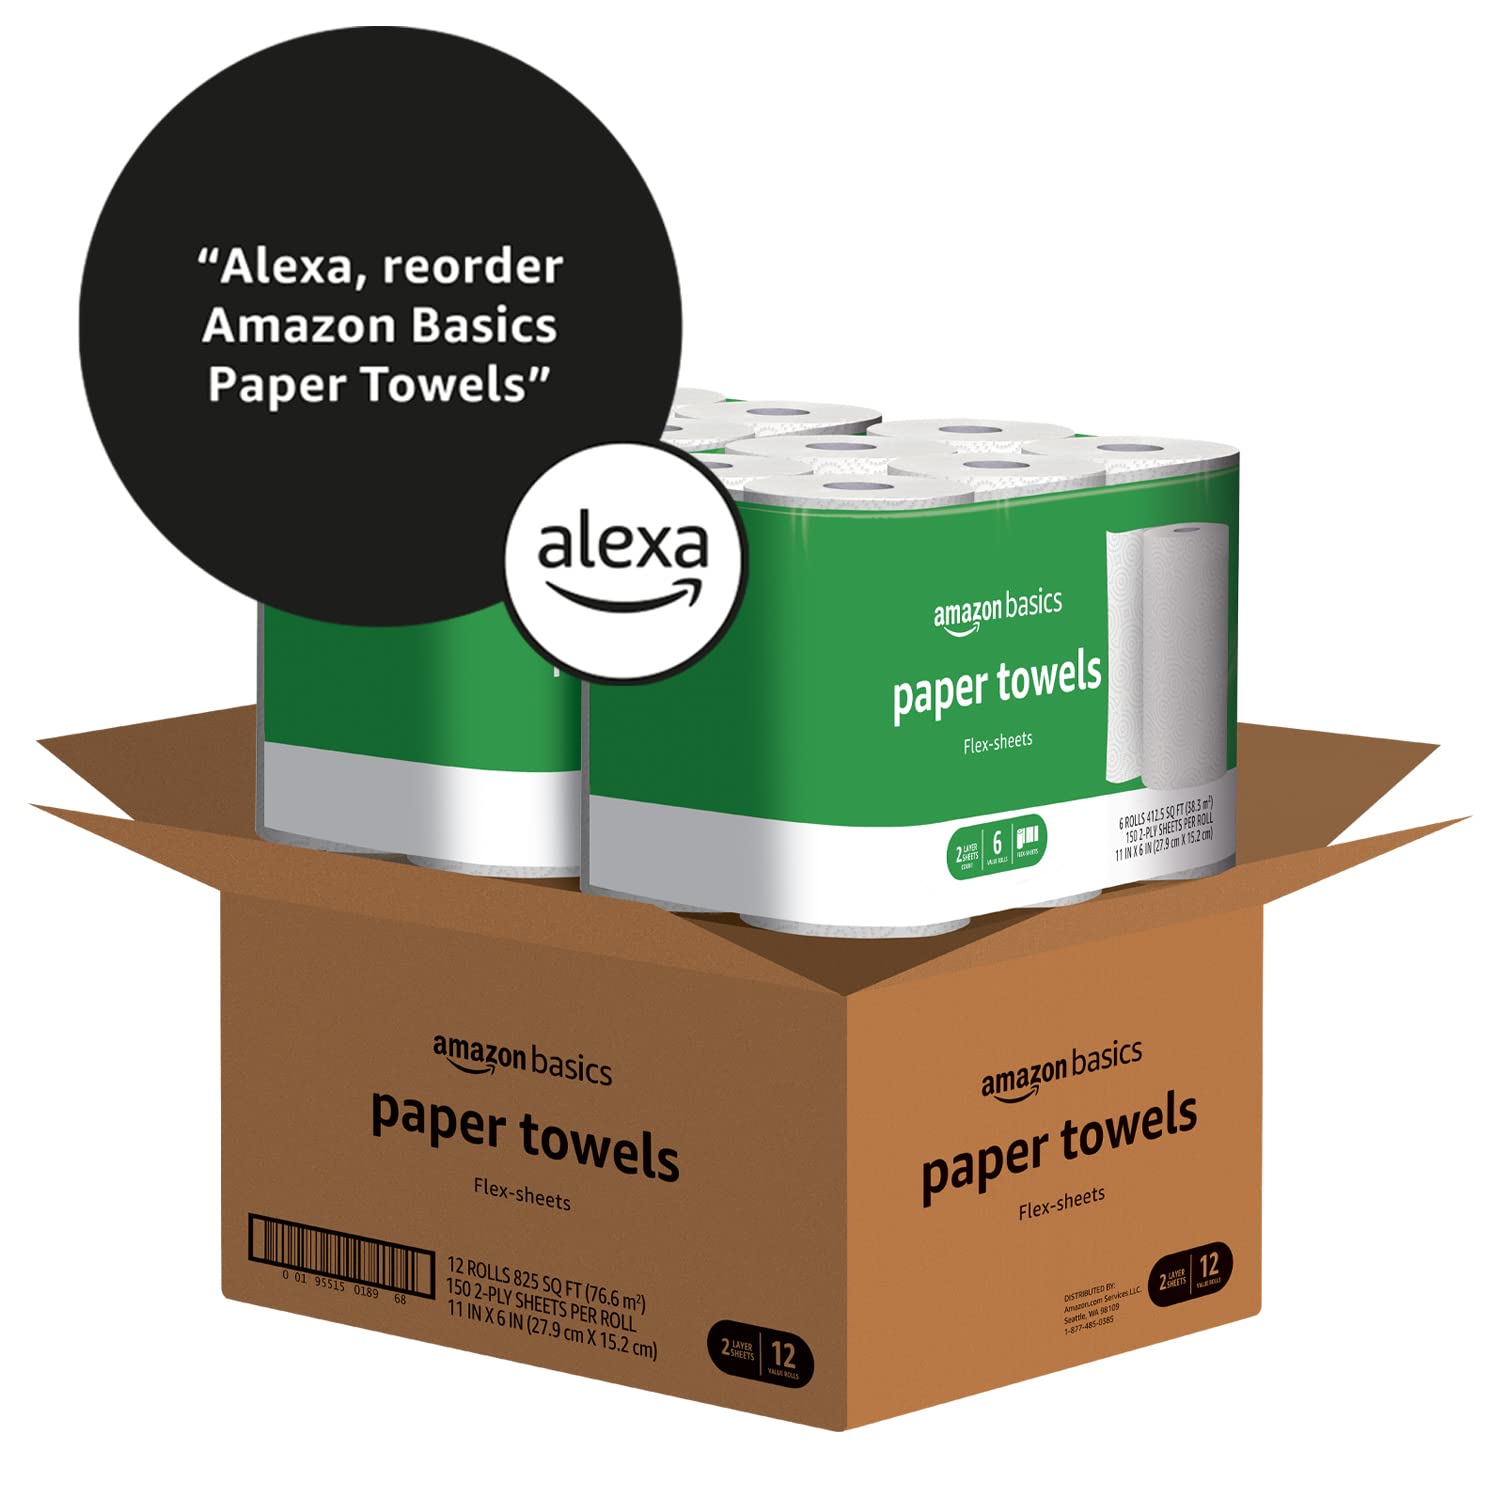 Amazon Basics 2-Ply Paper Towels, Flex-Sheets, 150 Sheets per Roll, 12 Rolls (2 Packs of 6), White